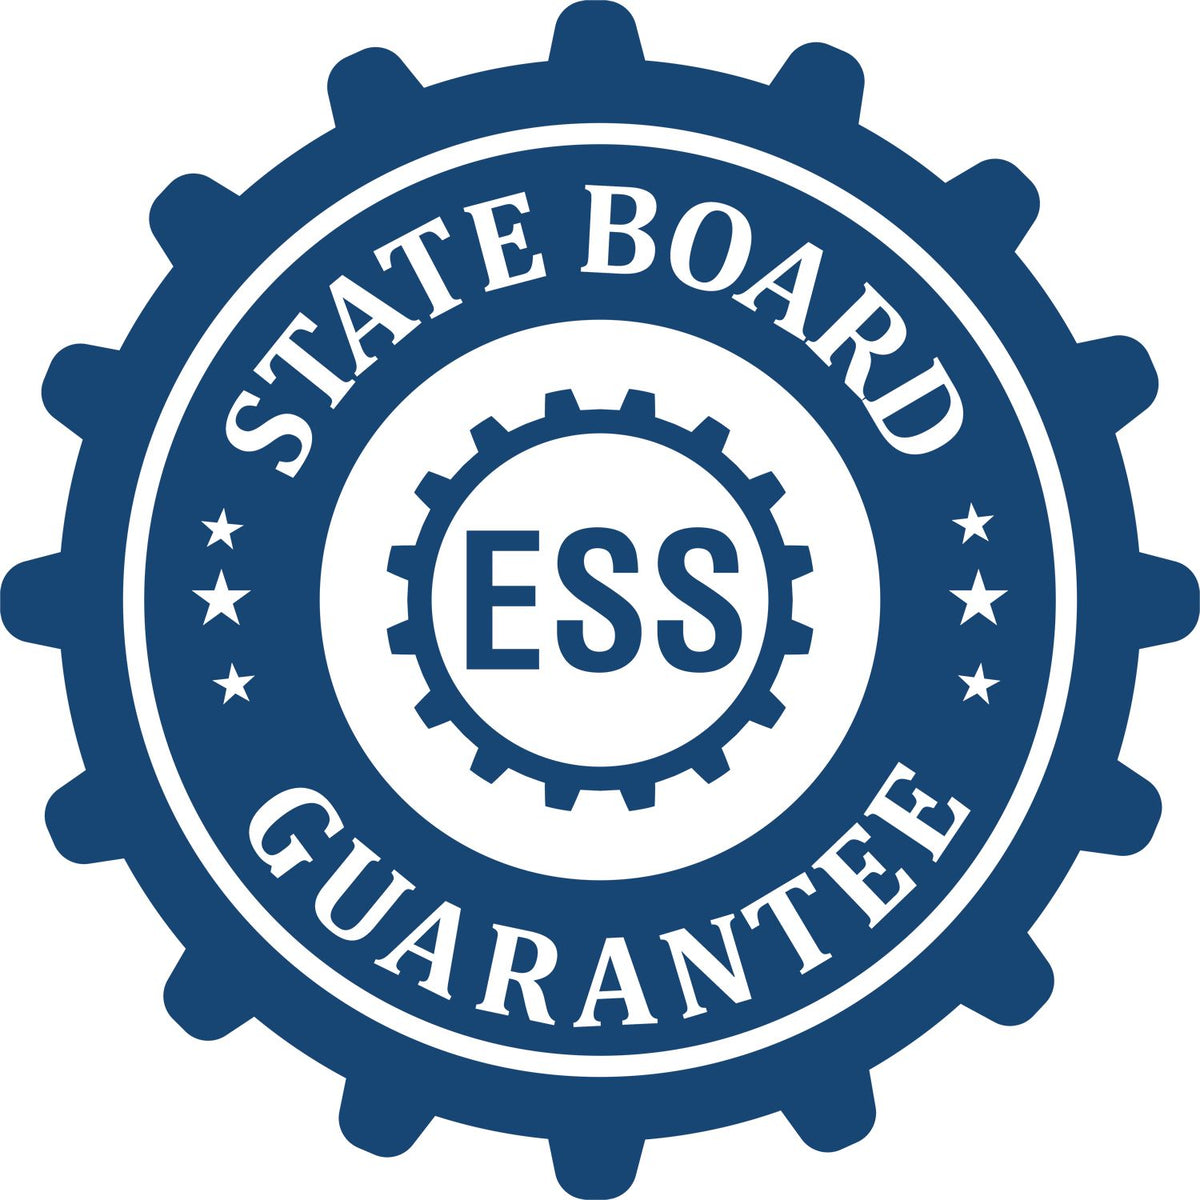 An emblem in a gear shape illustrating a state board guarantee for the Digital New Hampshire Landscape Architect Stamp product.